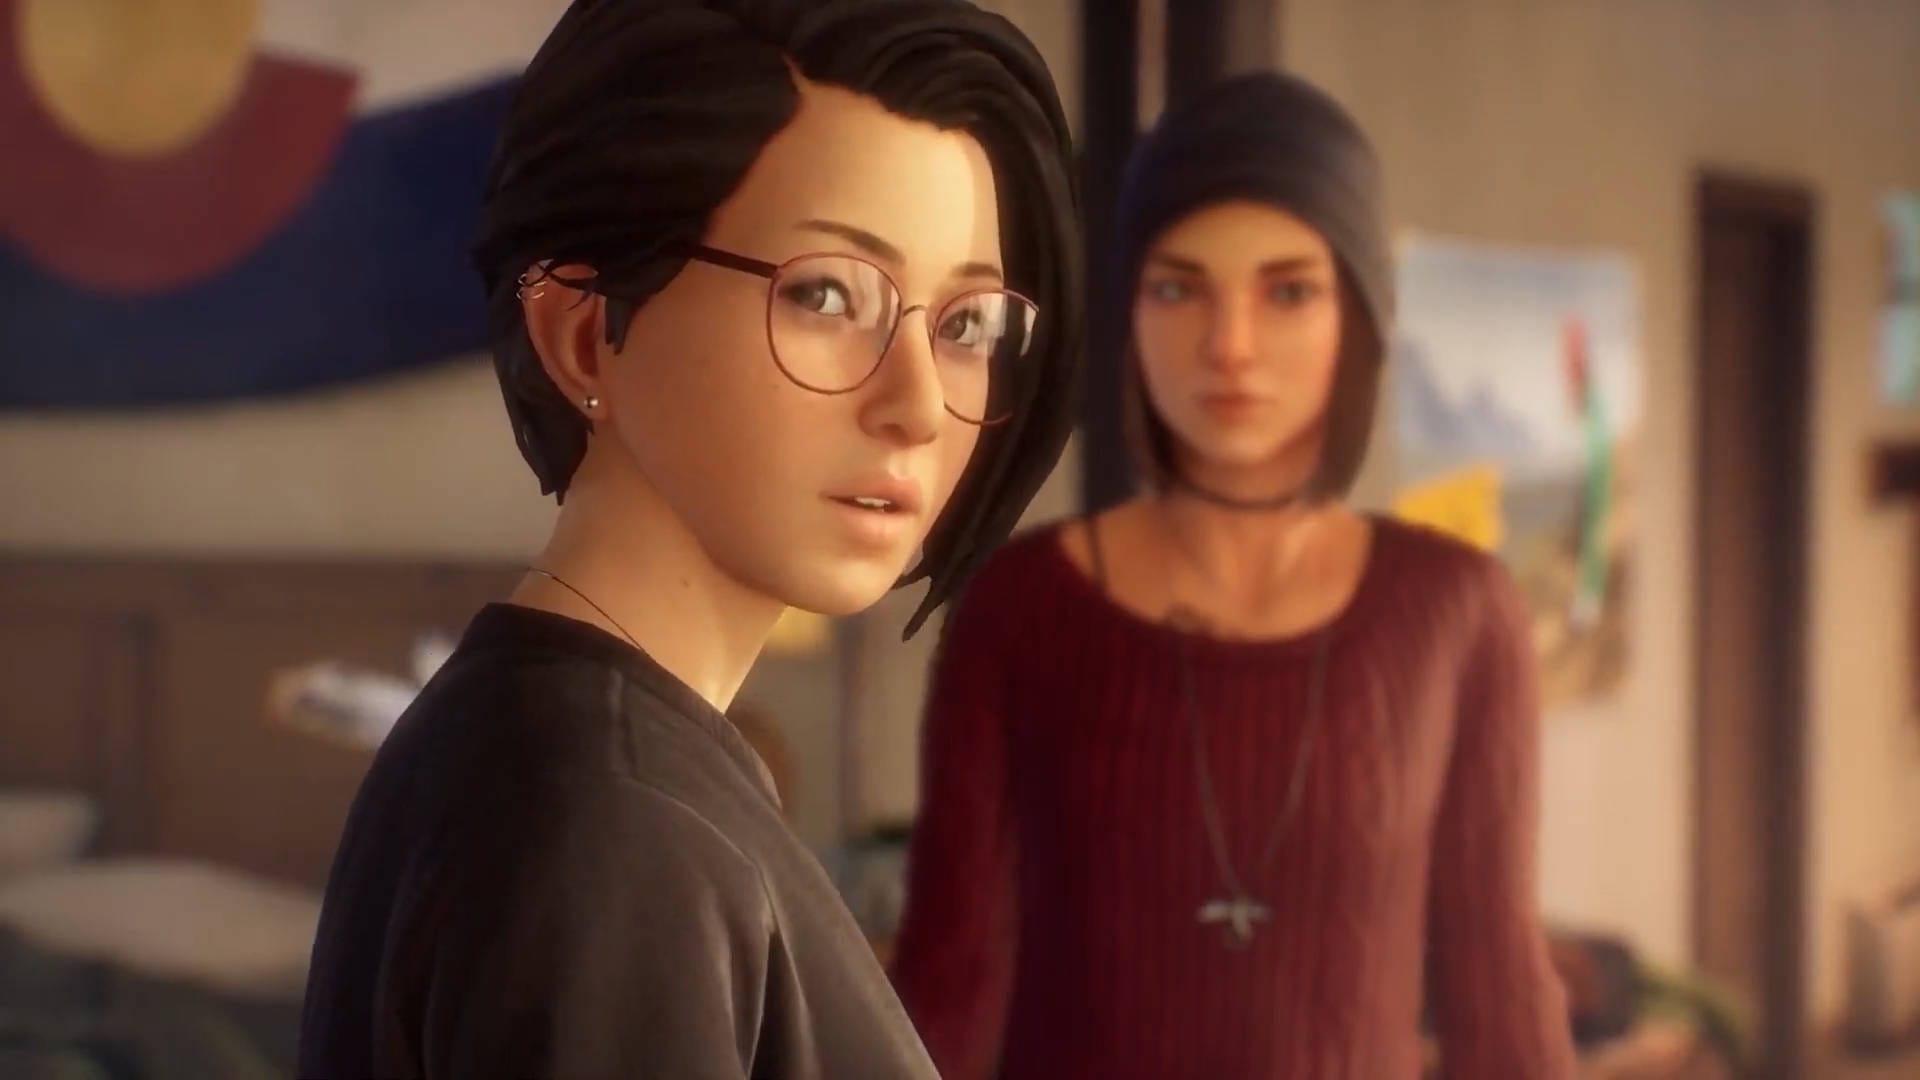 Life is Strange: True Colors & Life is Strange 2 Available Now on  PlayStation®Plus! - Square Enix